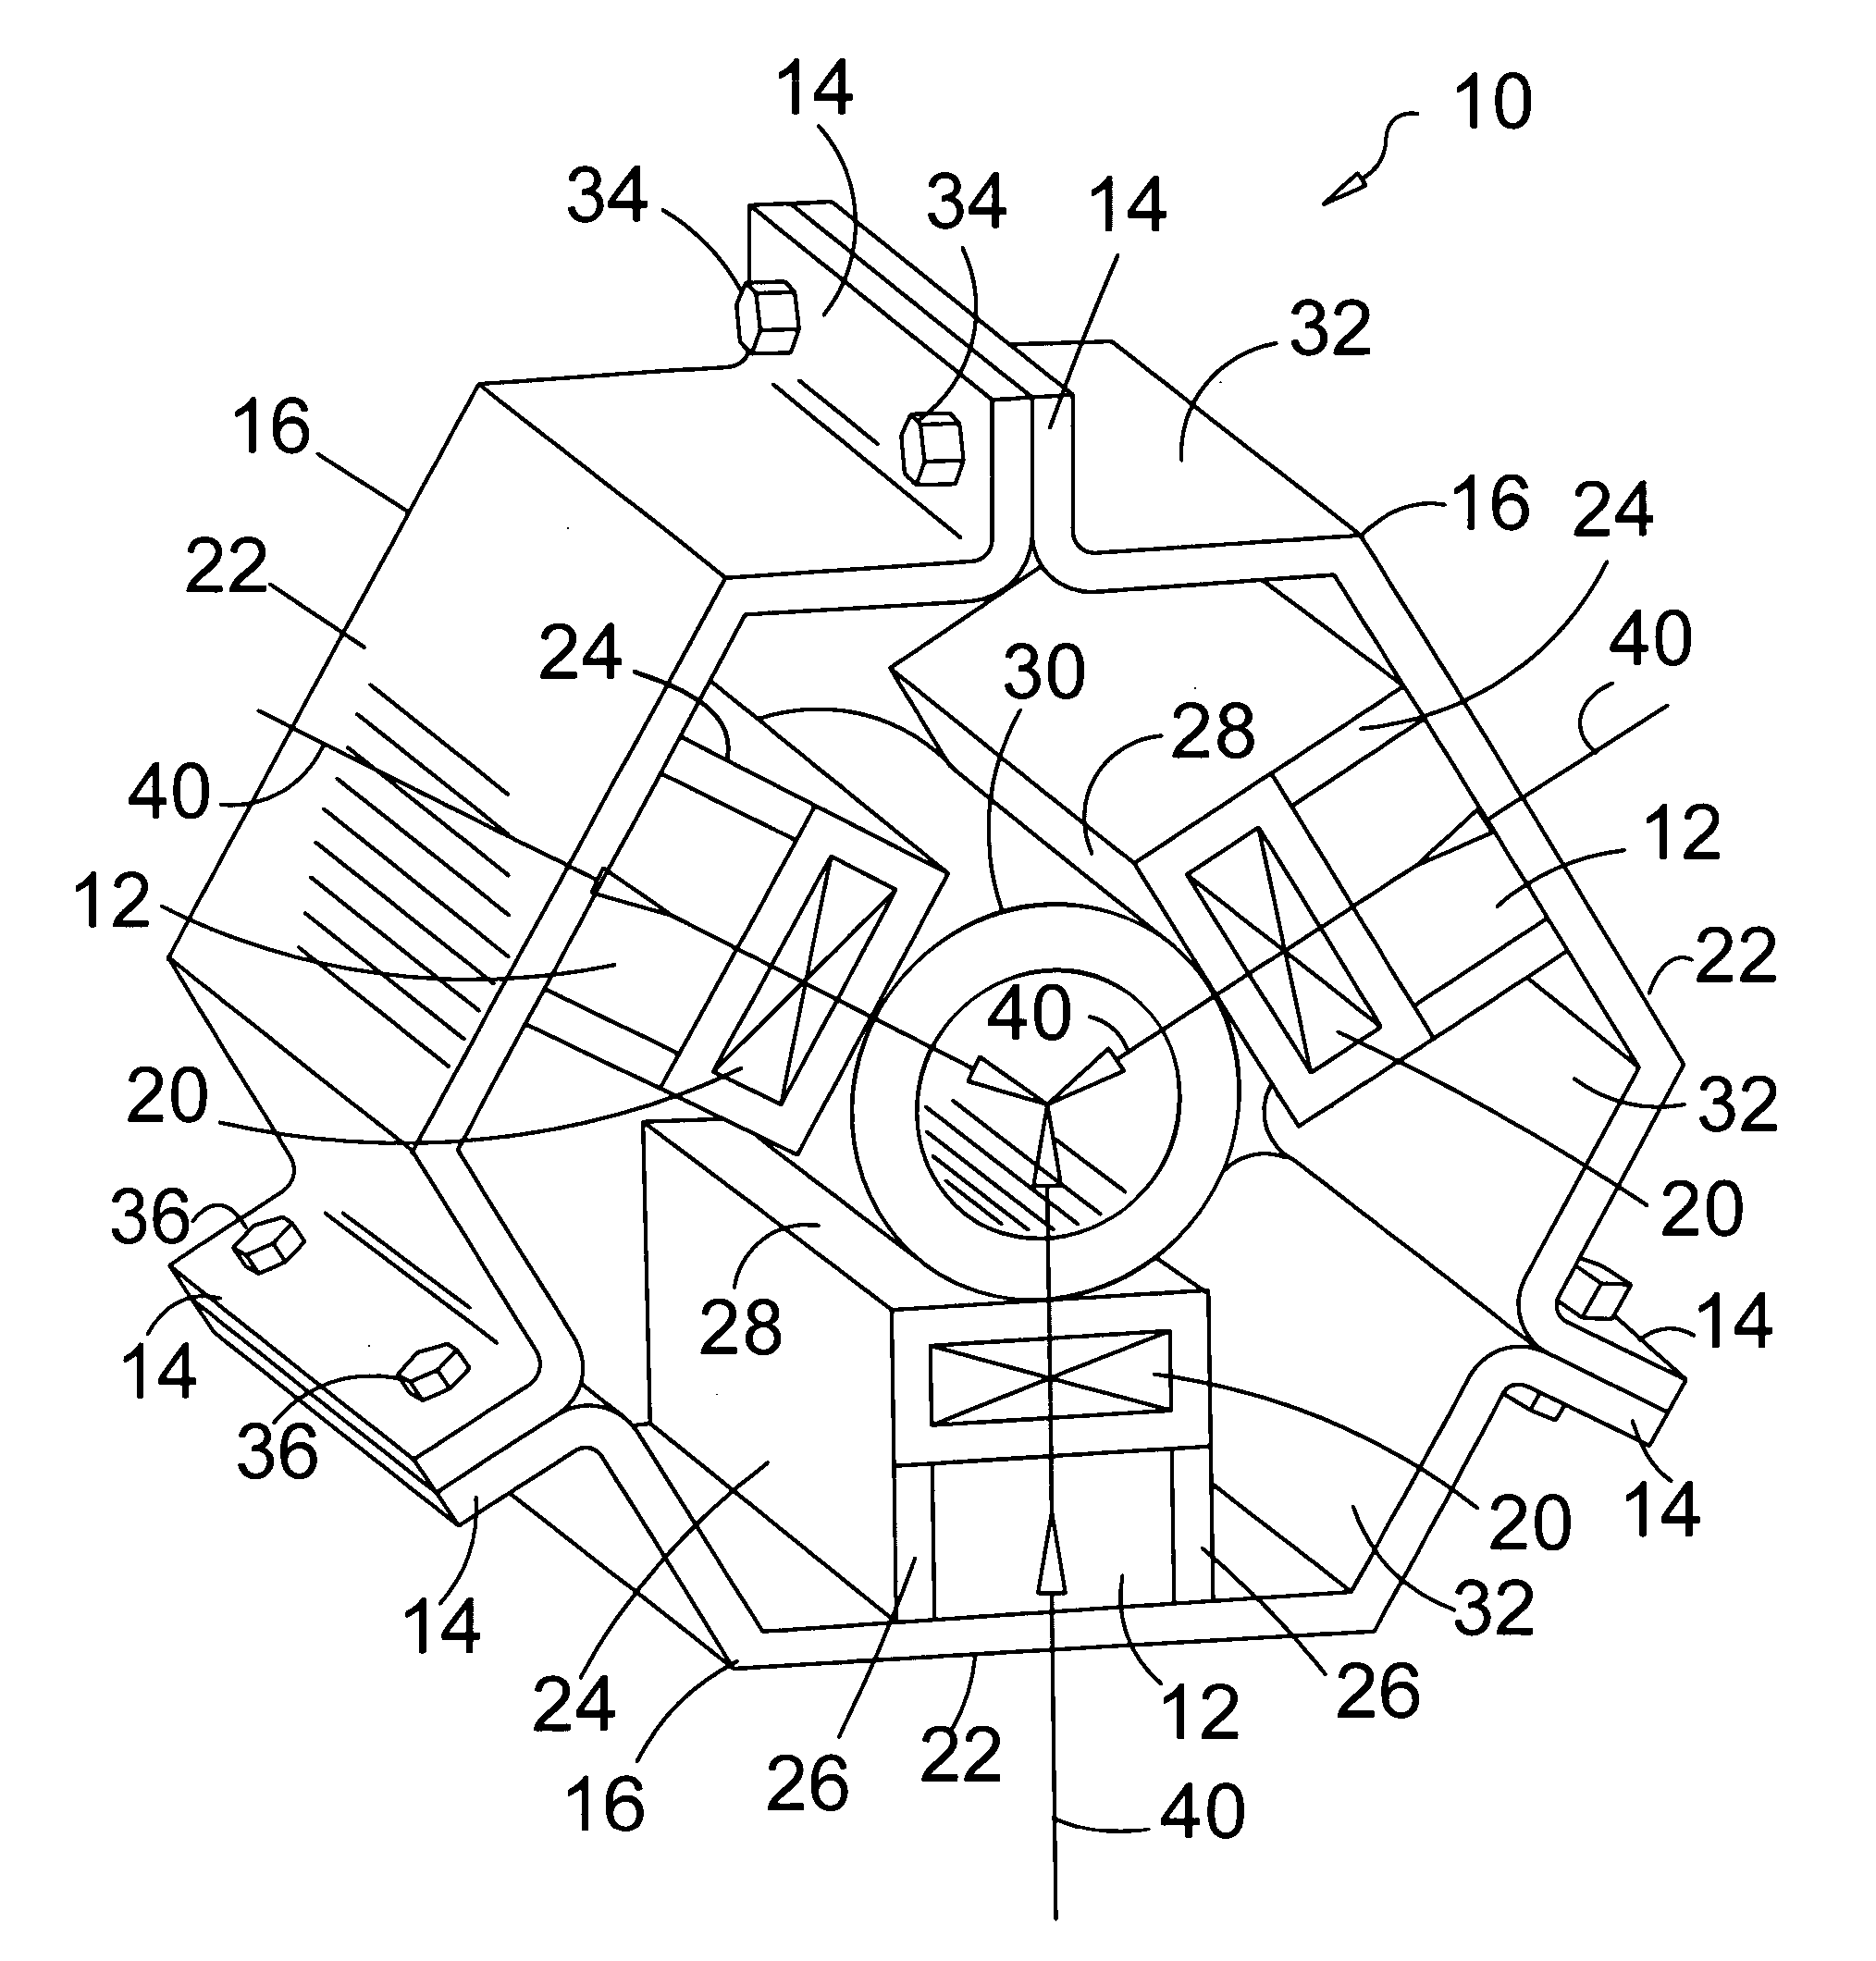 Device for focusing a magnetic field to treat fluids in conduits